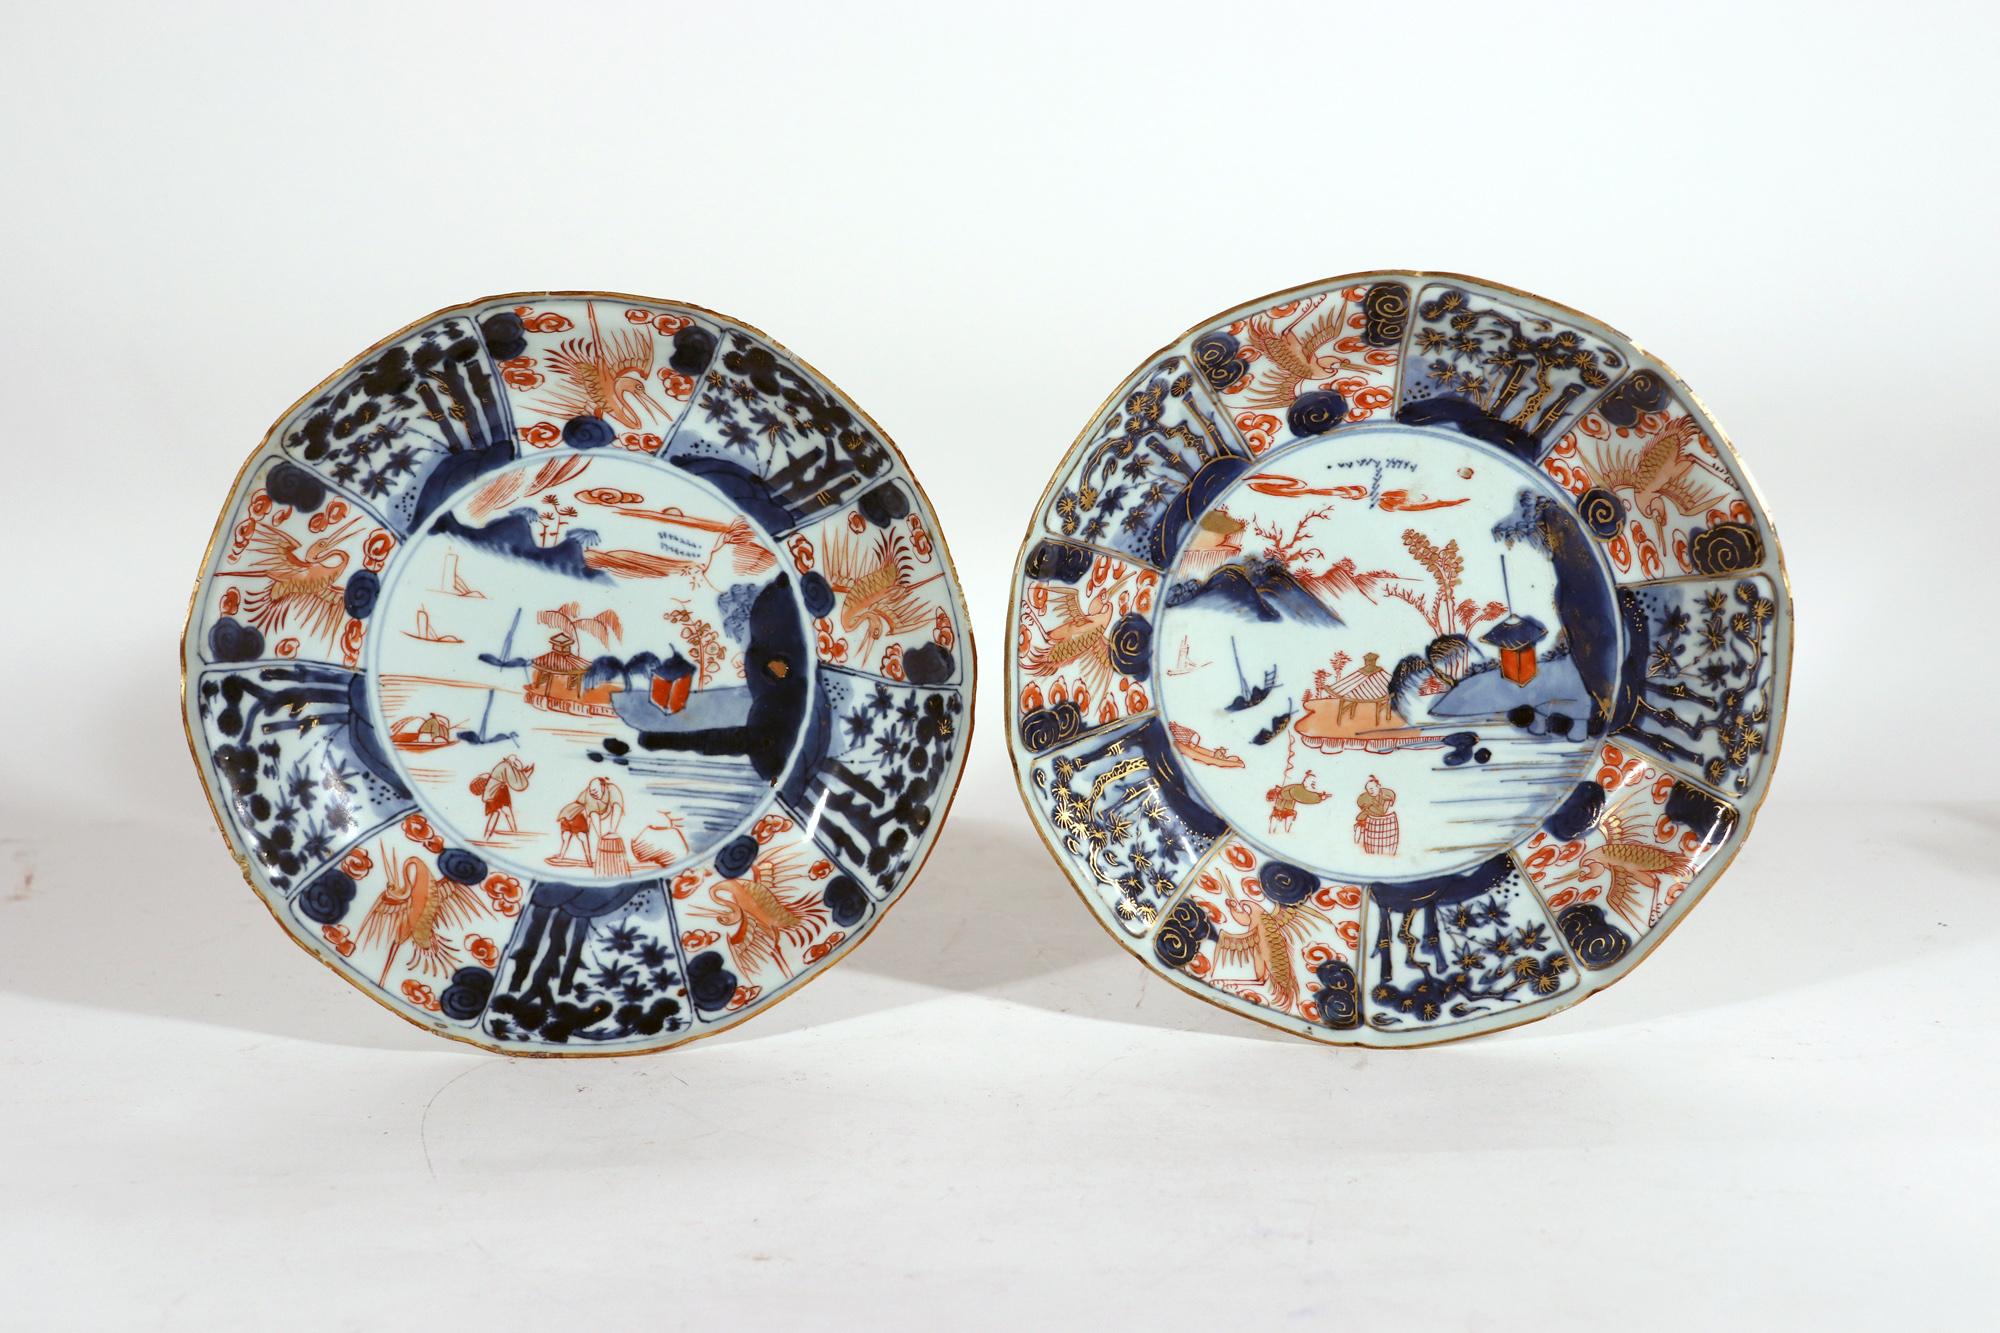 Chinese Export porcelain Imari dishes,
18th century,

The pair of Chinese Export shaped saucer dishes have a central roundel with a riverside scene with buildings by the water with ships in the background. In the foreground are two figures, one